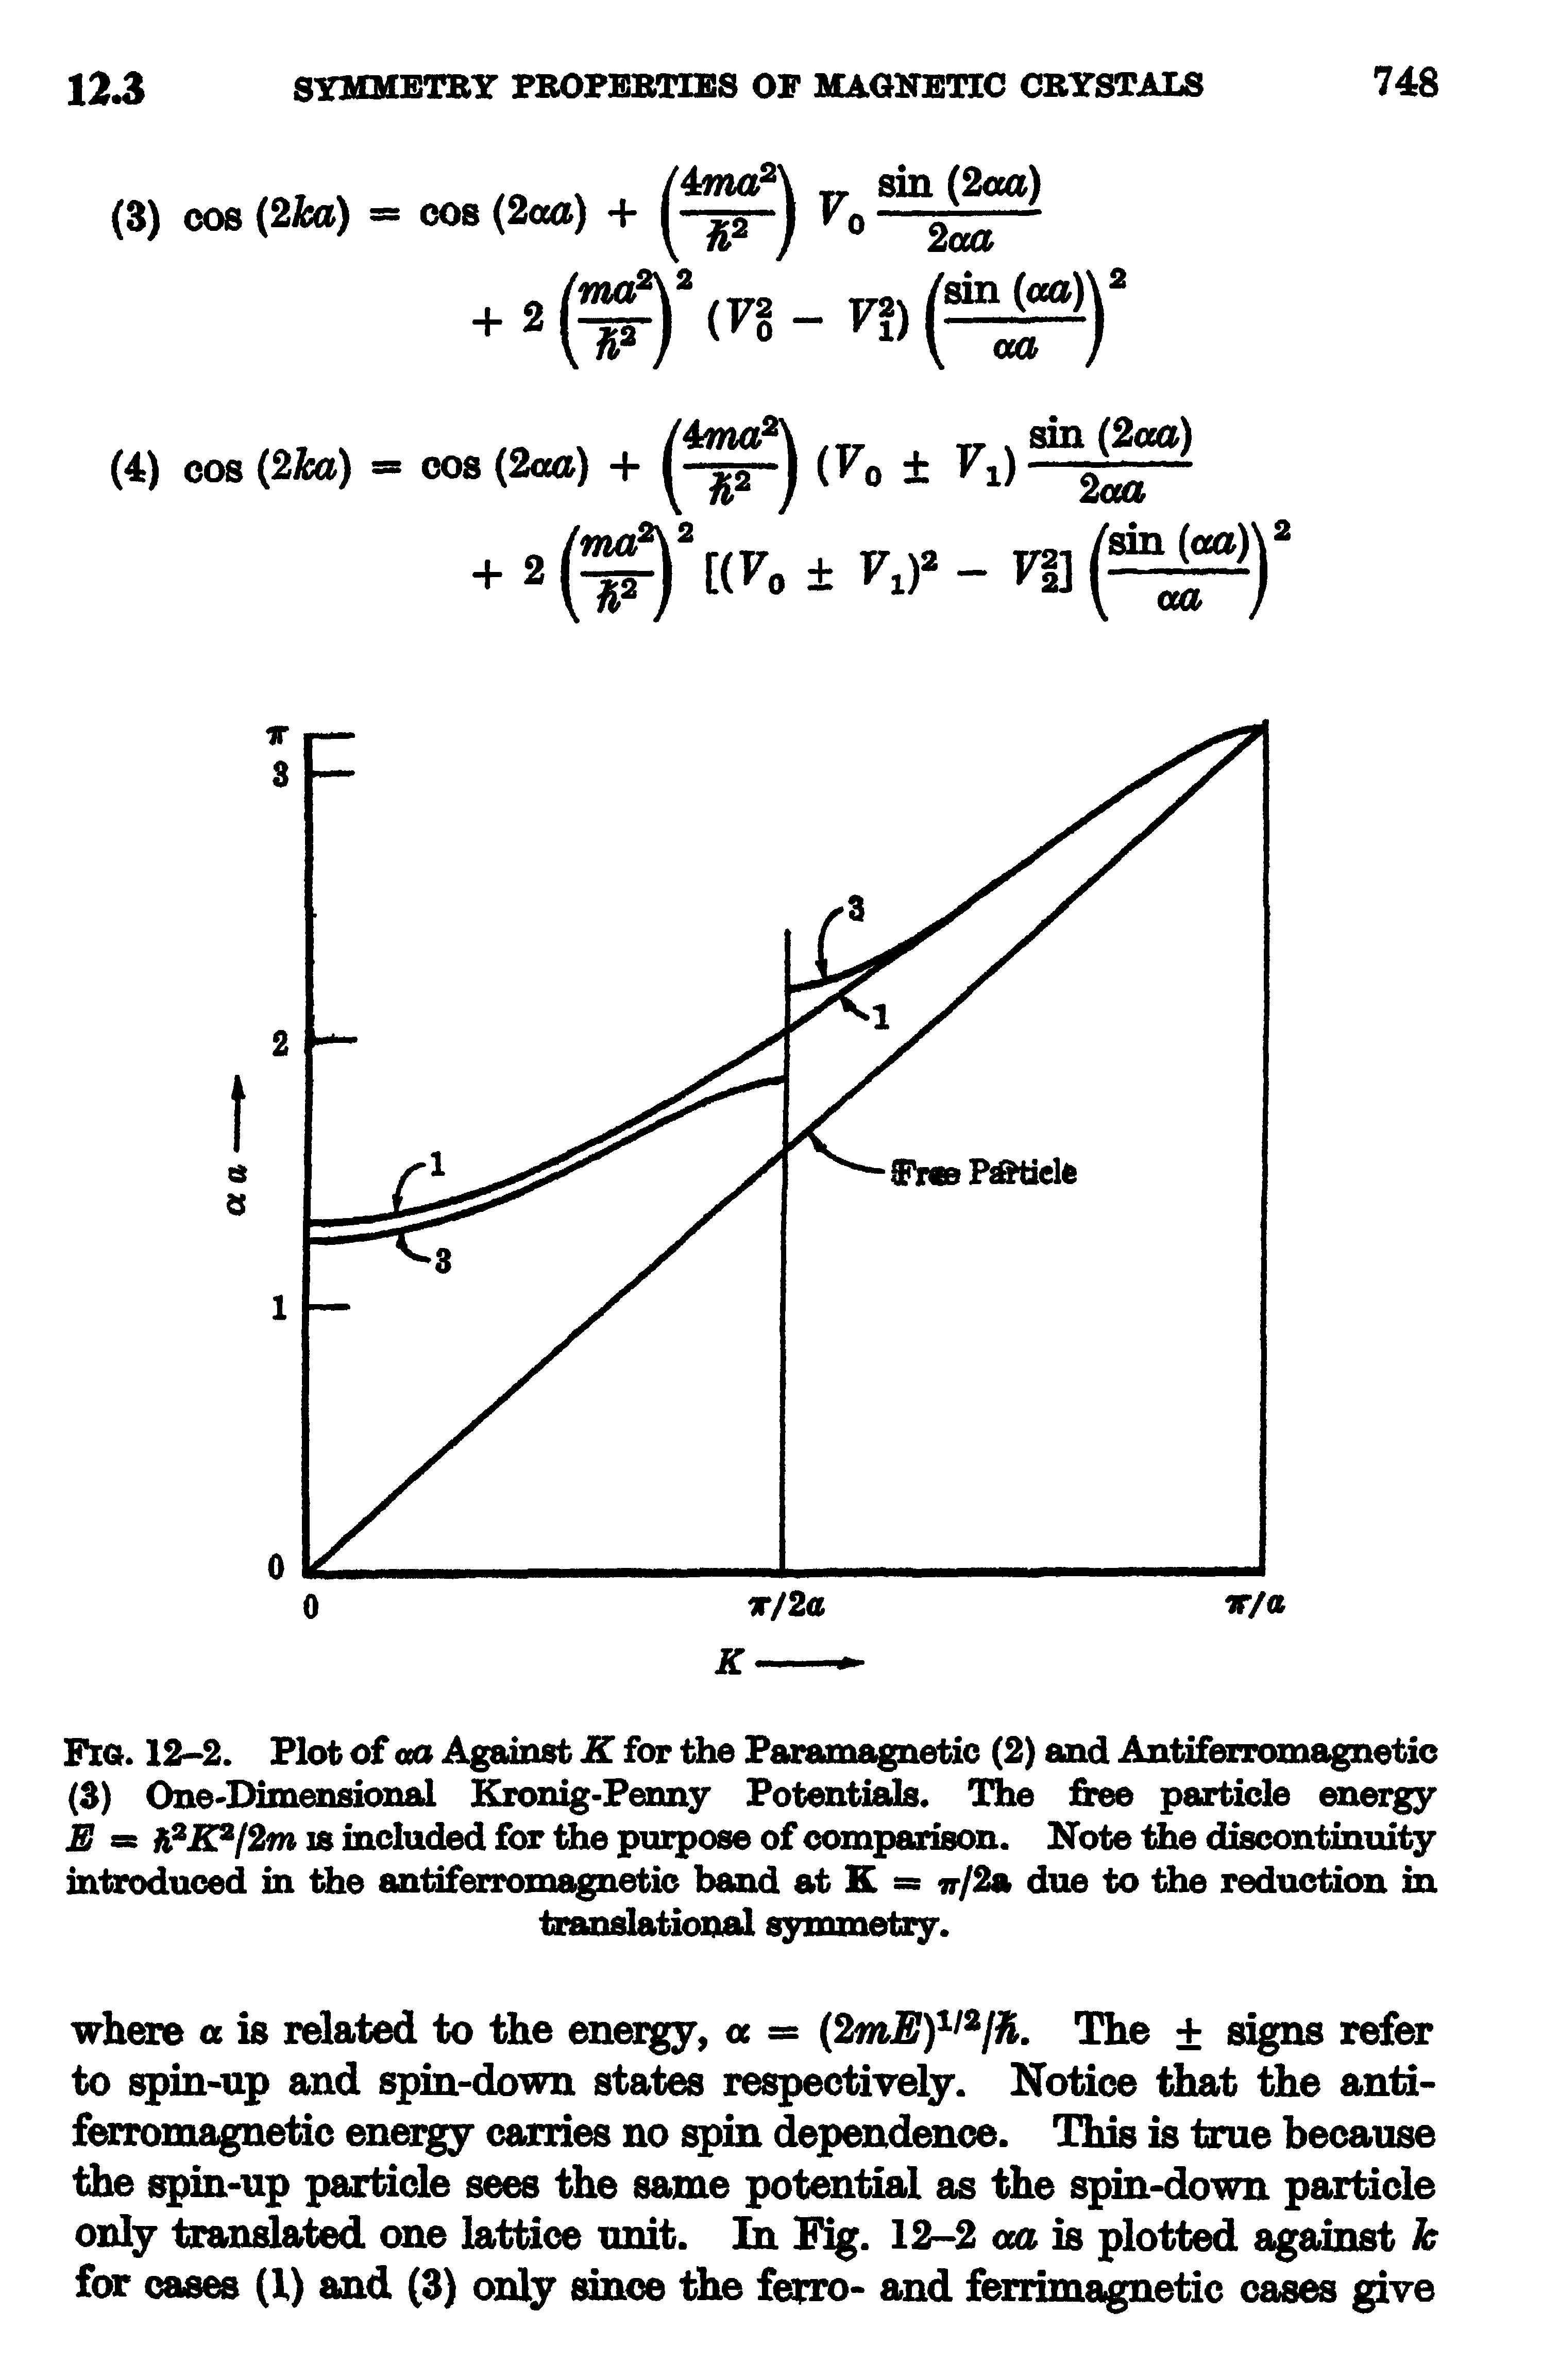 Fig. 12-2. Plot of aa Against K for the Paramagnetic (2) and Antiferromagnetic (3) One-Dimensional Kronig-Penny Potentials. The free particle energy E m is included for the purpose of comparison. Note the discontinuity...